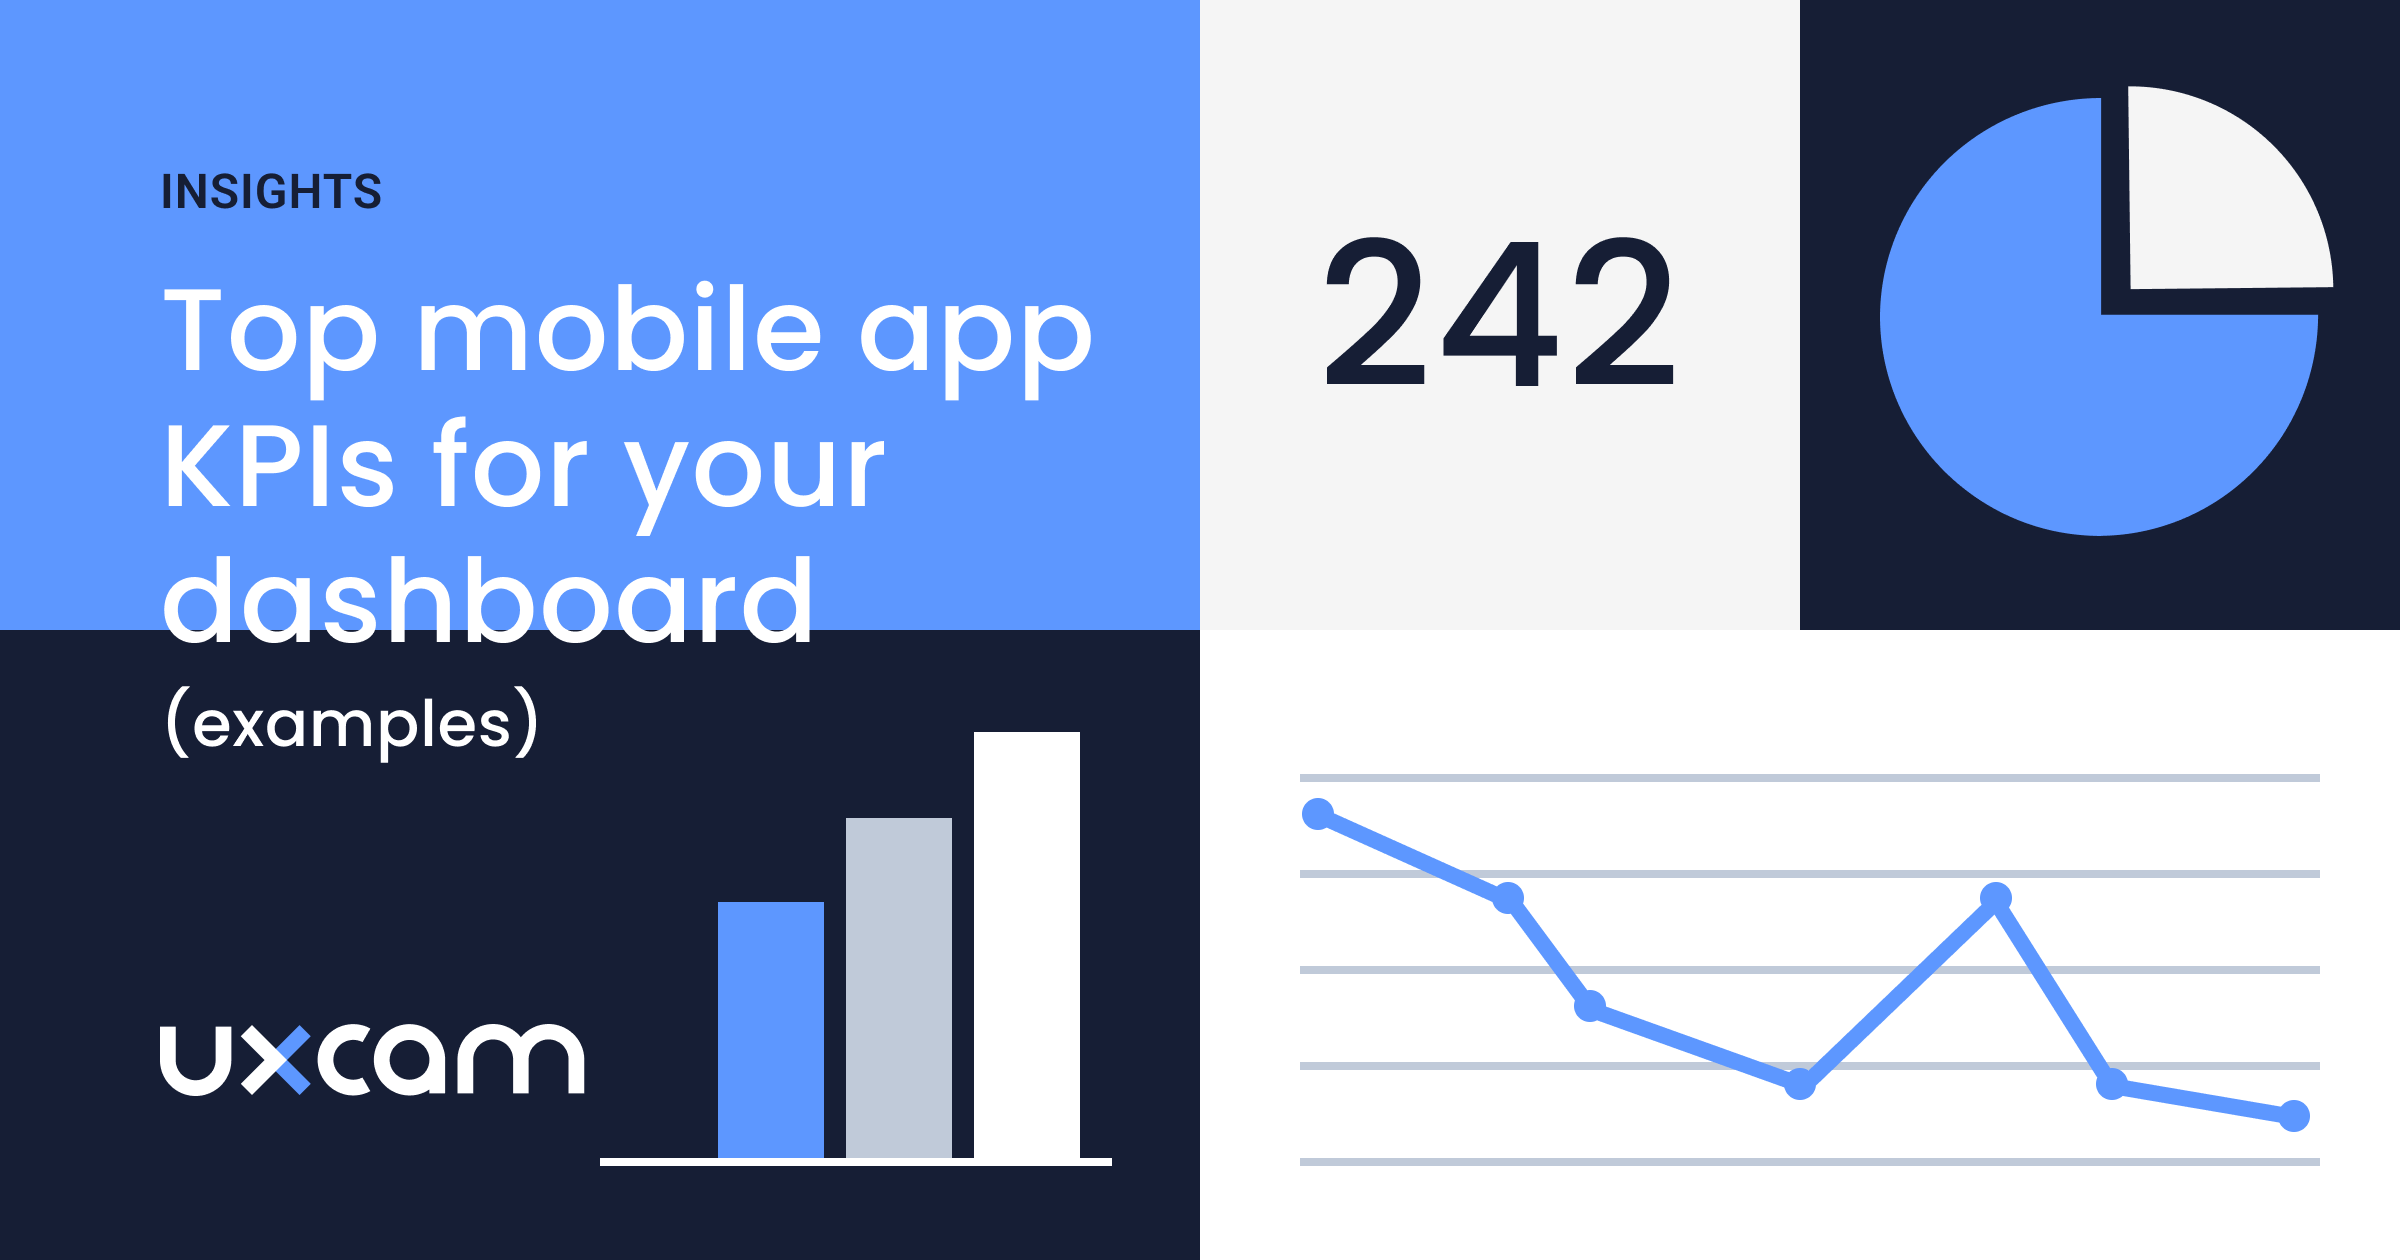 Top mobile app KPIs for your dashboard